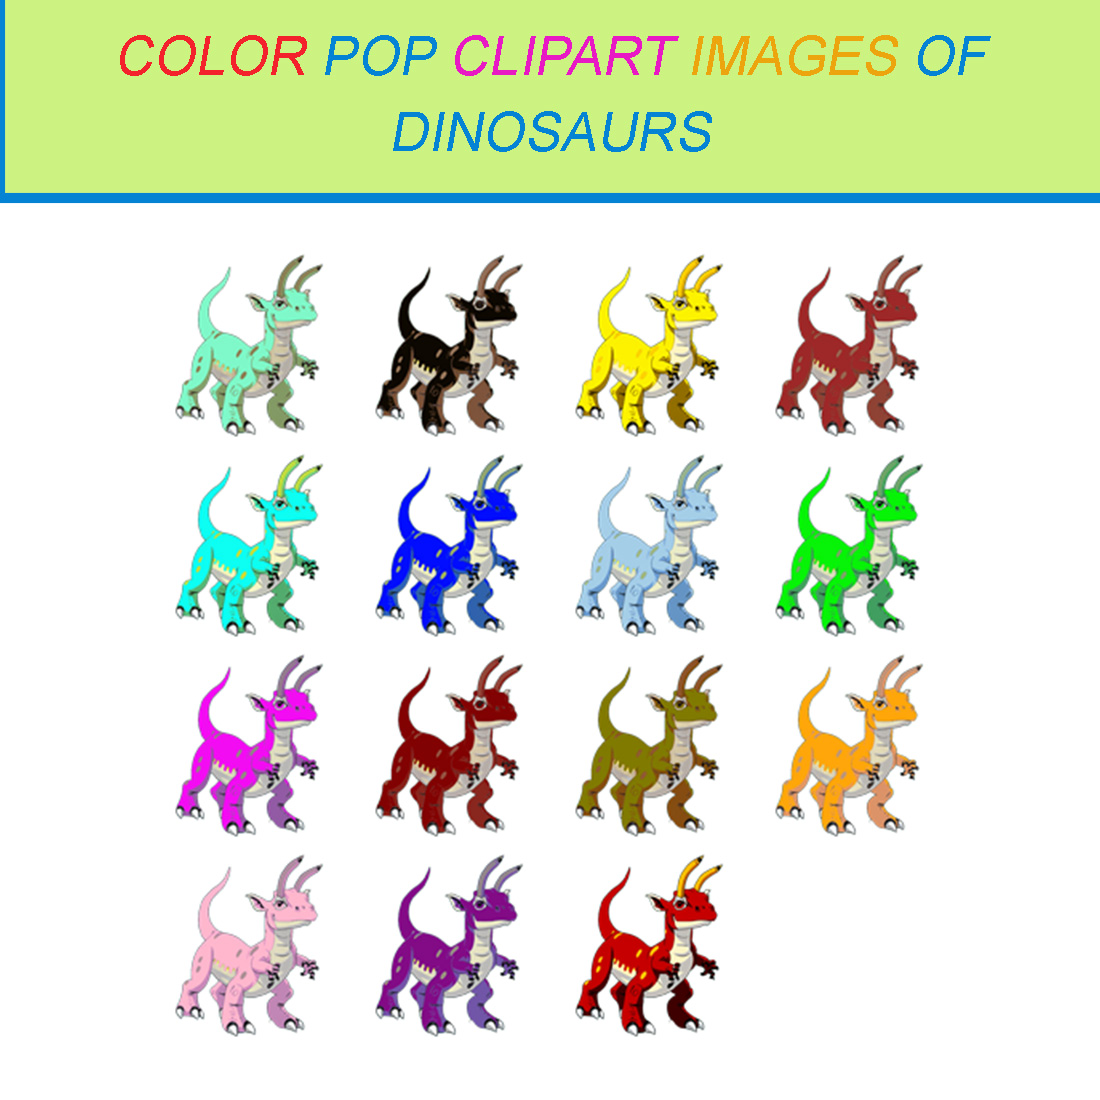 15 COLOR POP CLIPART IMAGES OF DINOSAURS cover image.